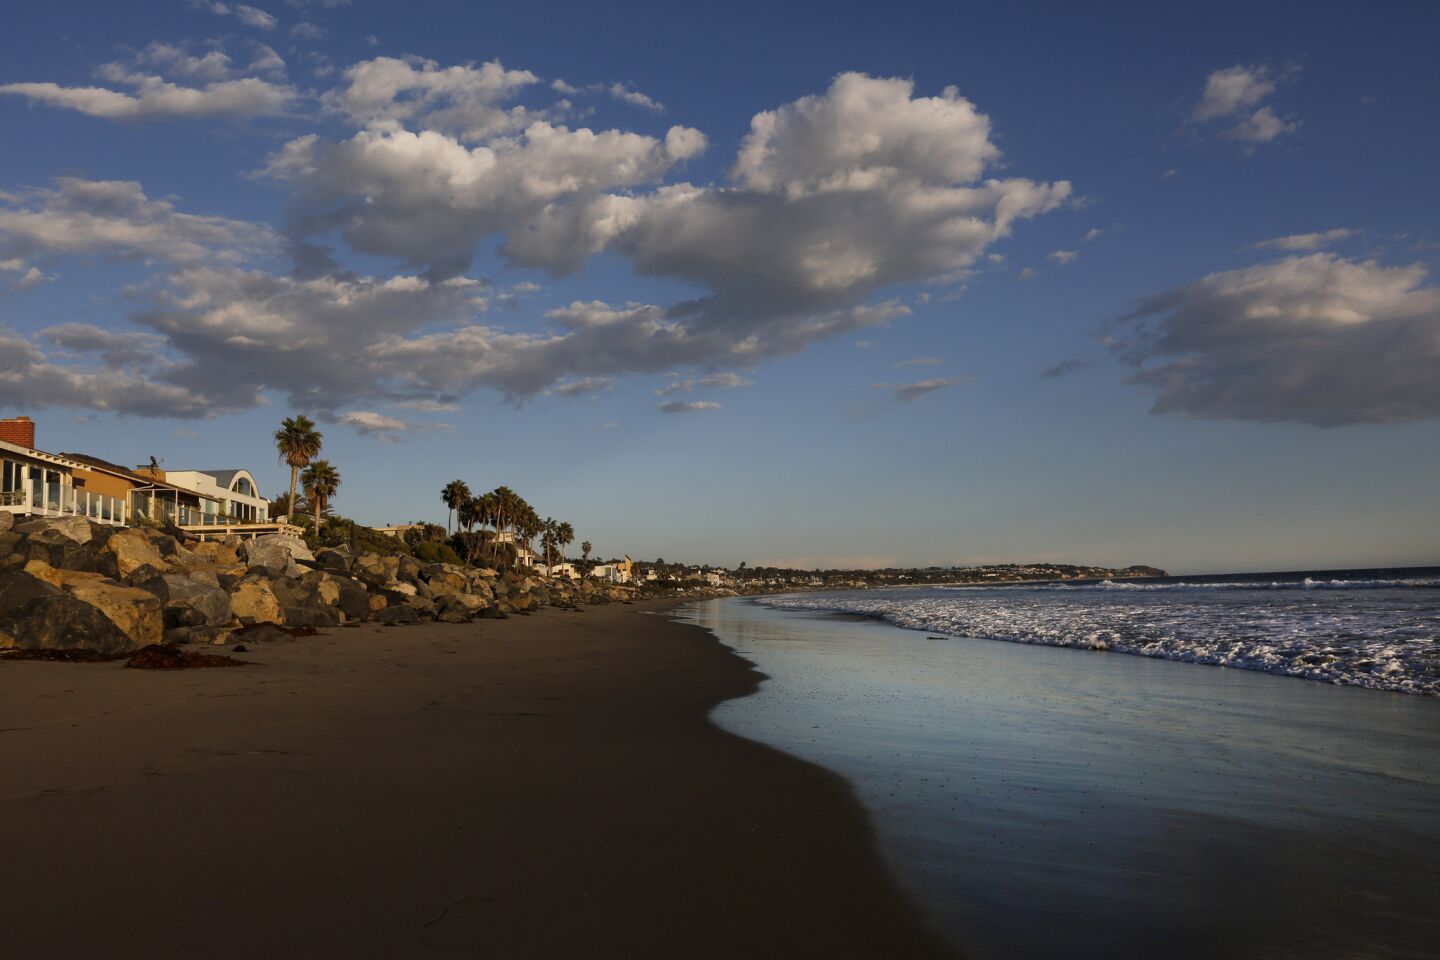 Malibu's Broad Beach could once again live up to its name.